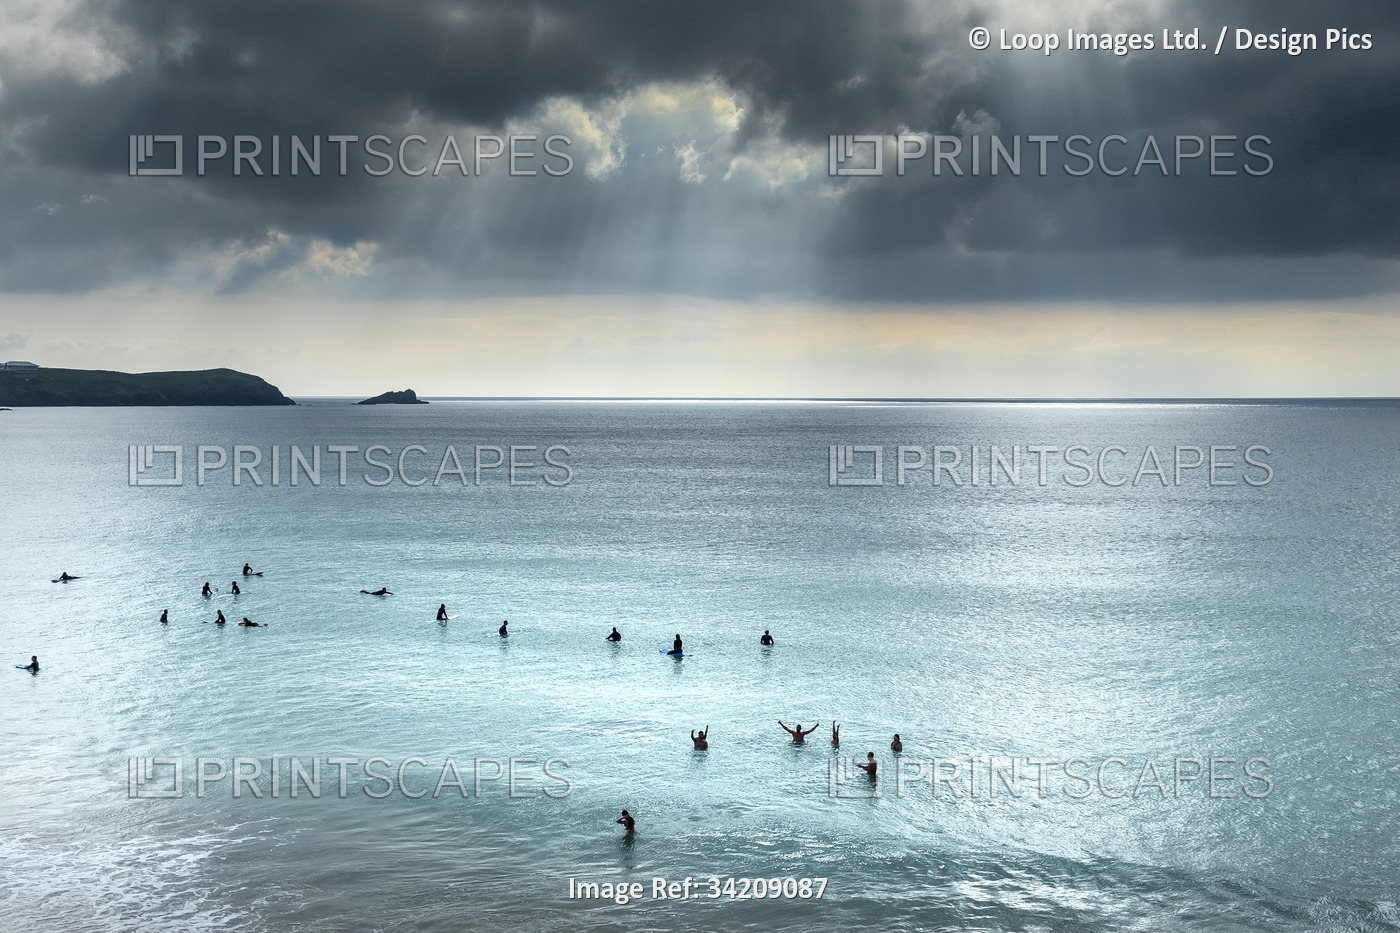 Surfers waiting for a wave on a calm sea at Fistral in Newquay in Cornwall.